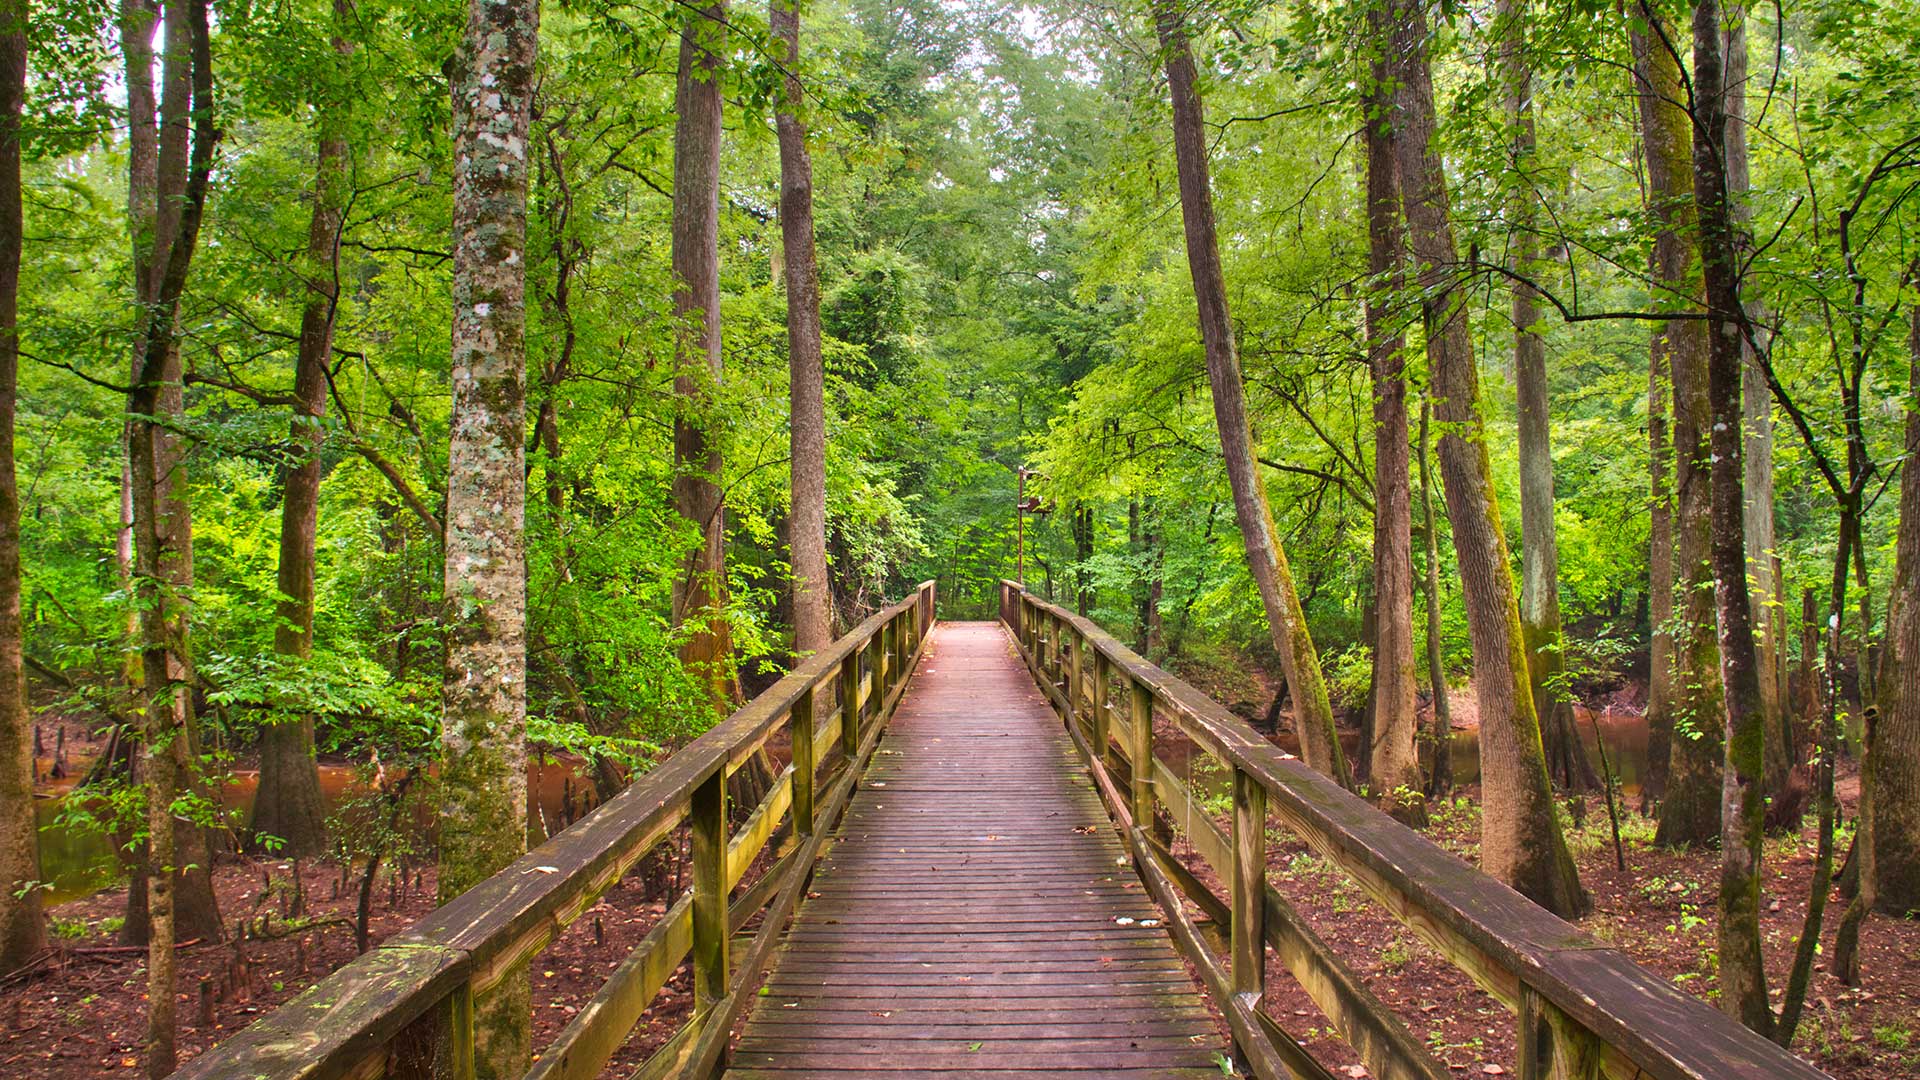 A boardwalk-style walking path in Congaree National Park